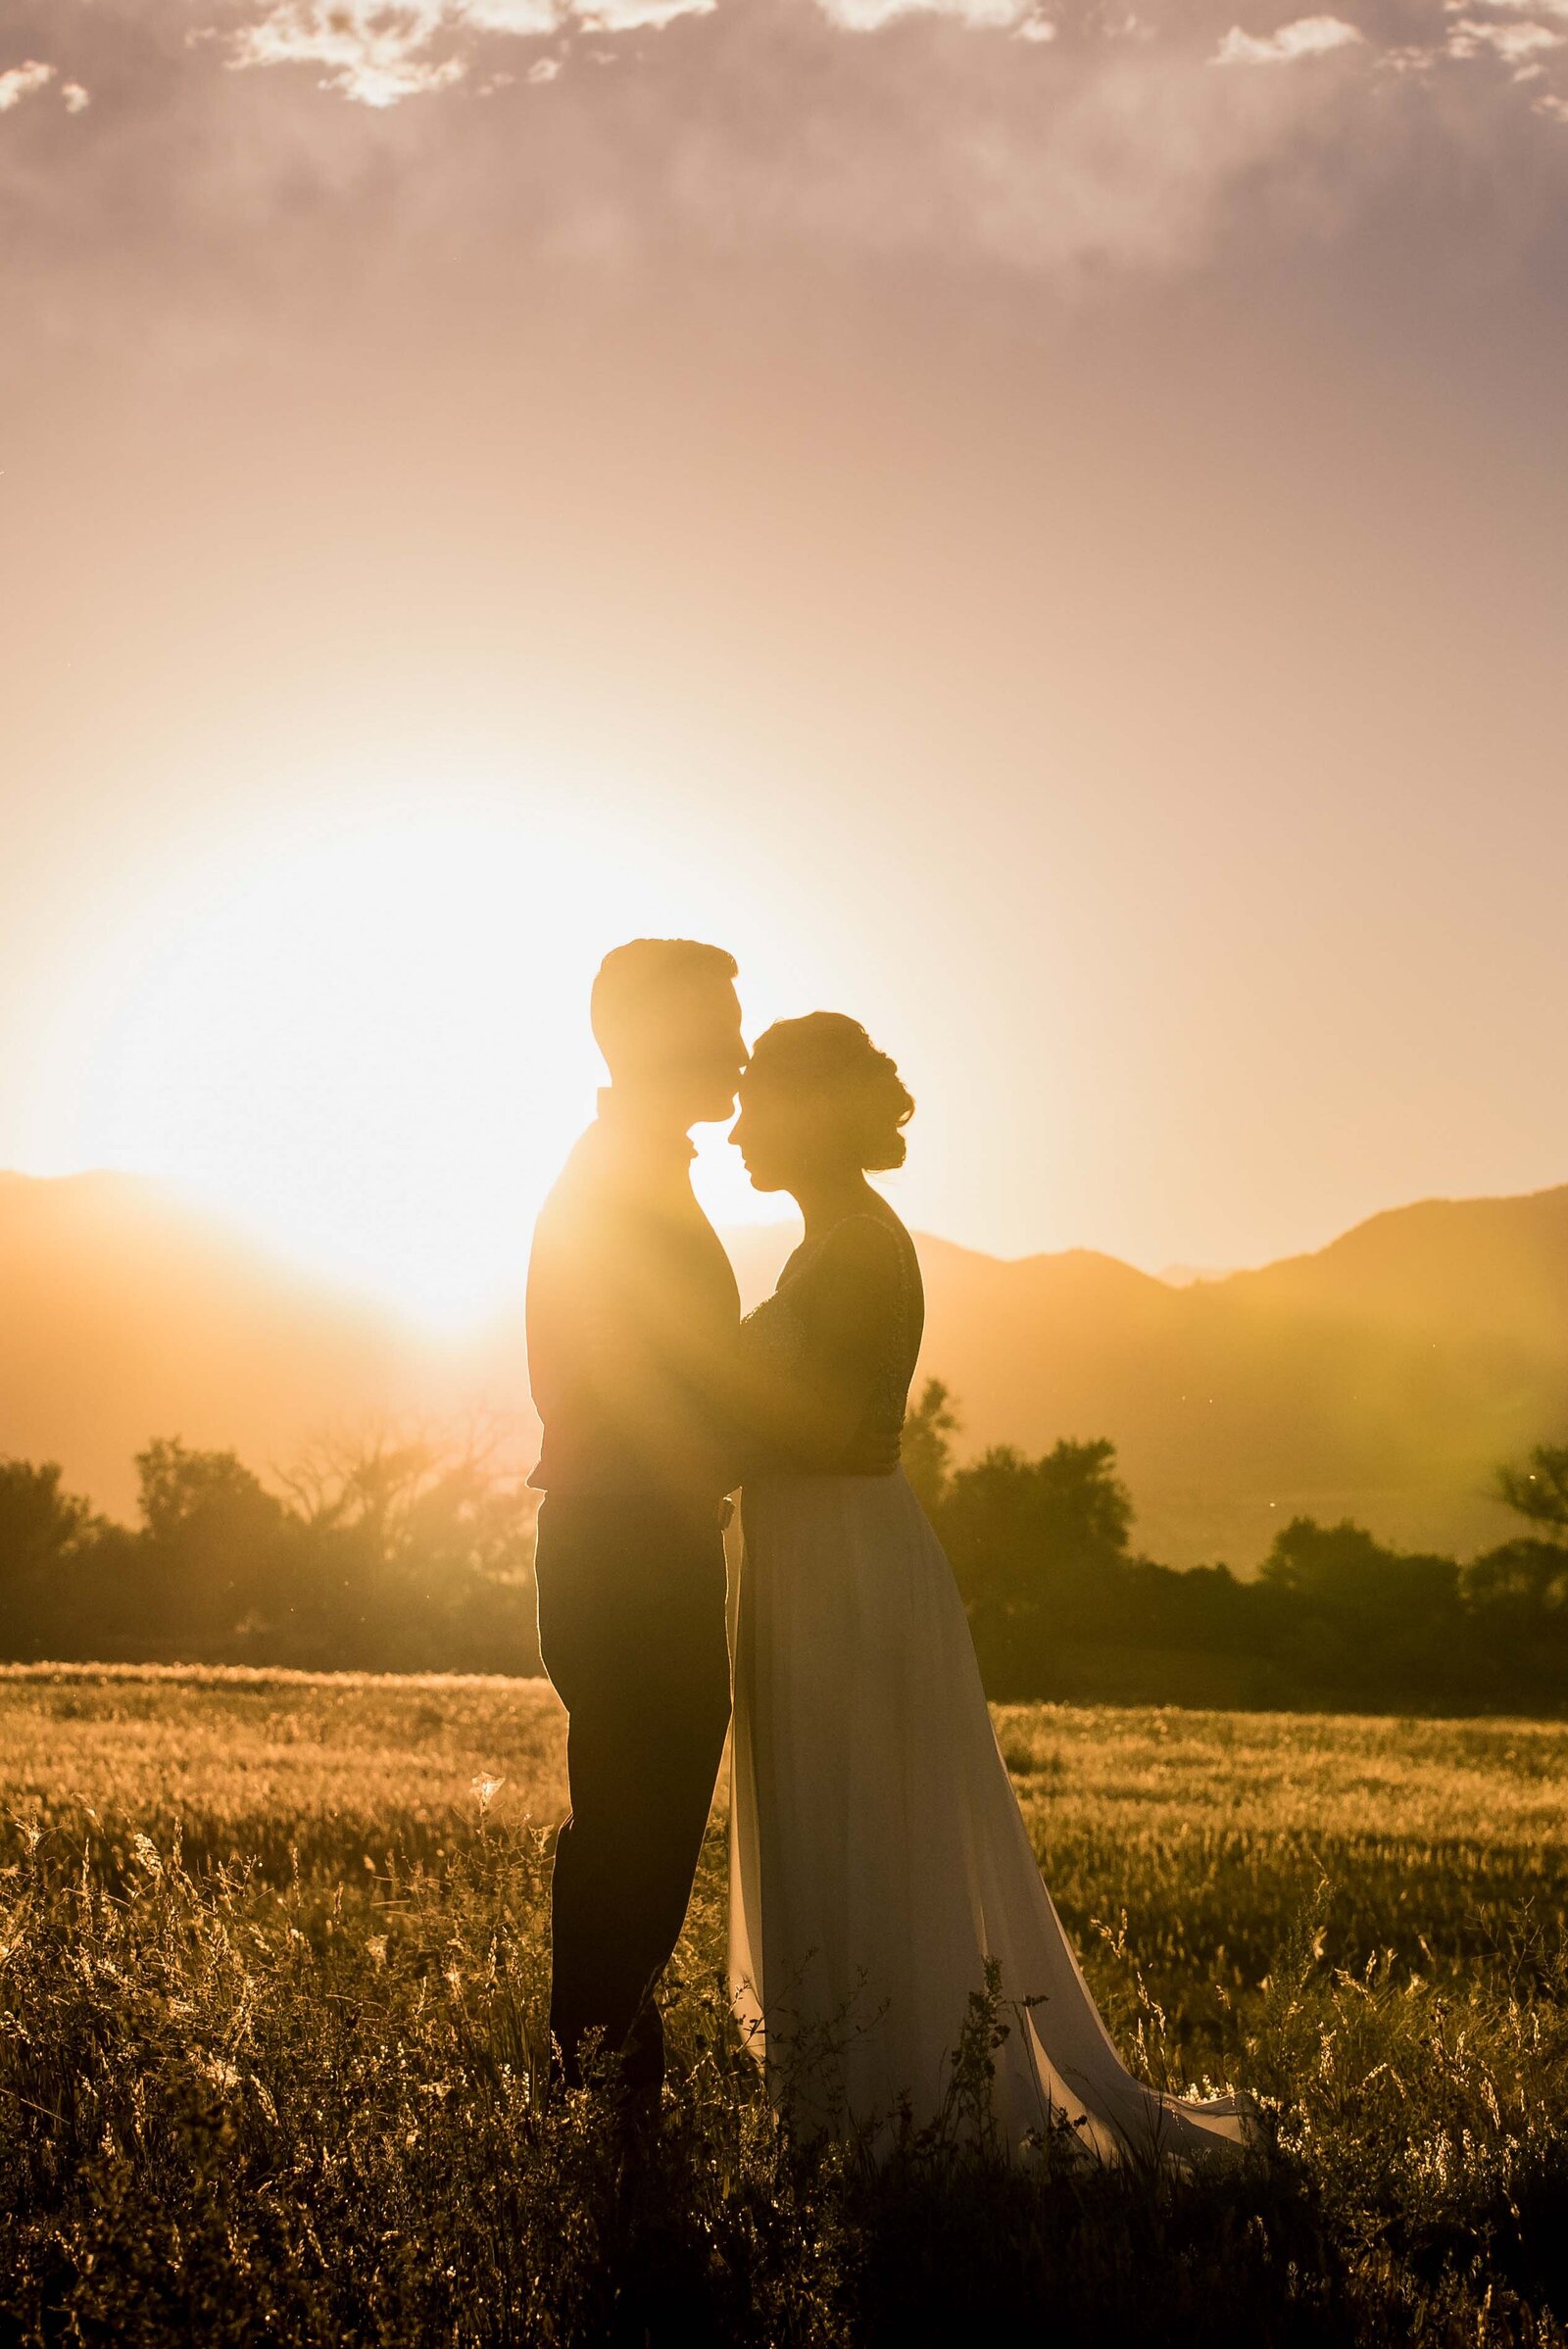 A bride and groom stand in a field at golden hour  and the groom kisses the bride on the forehead.